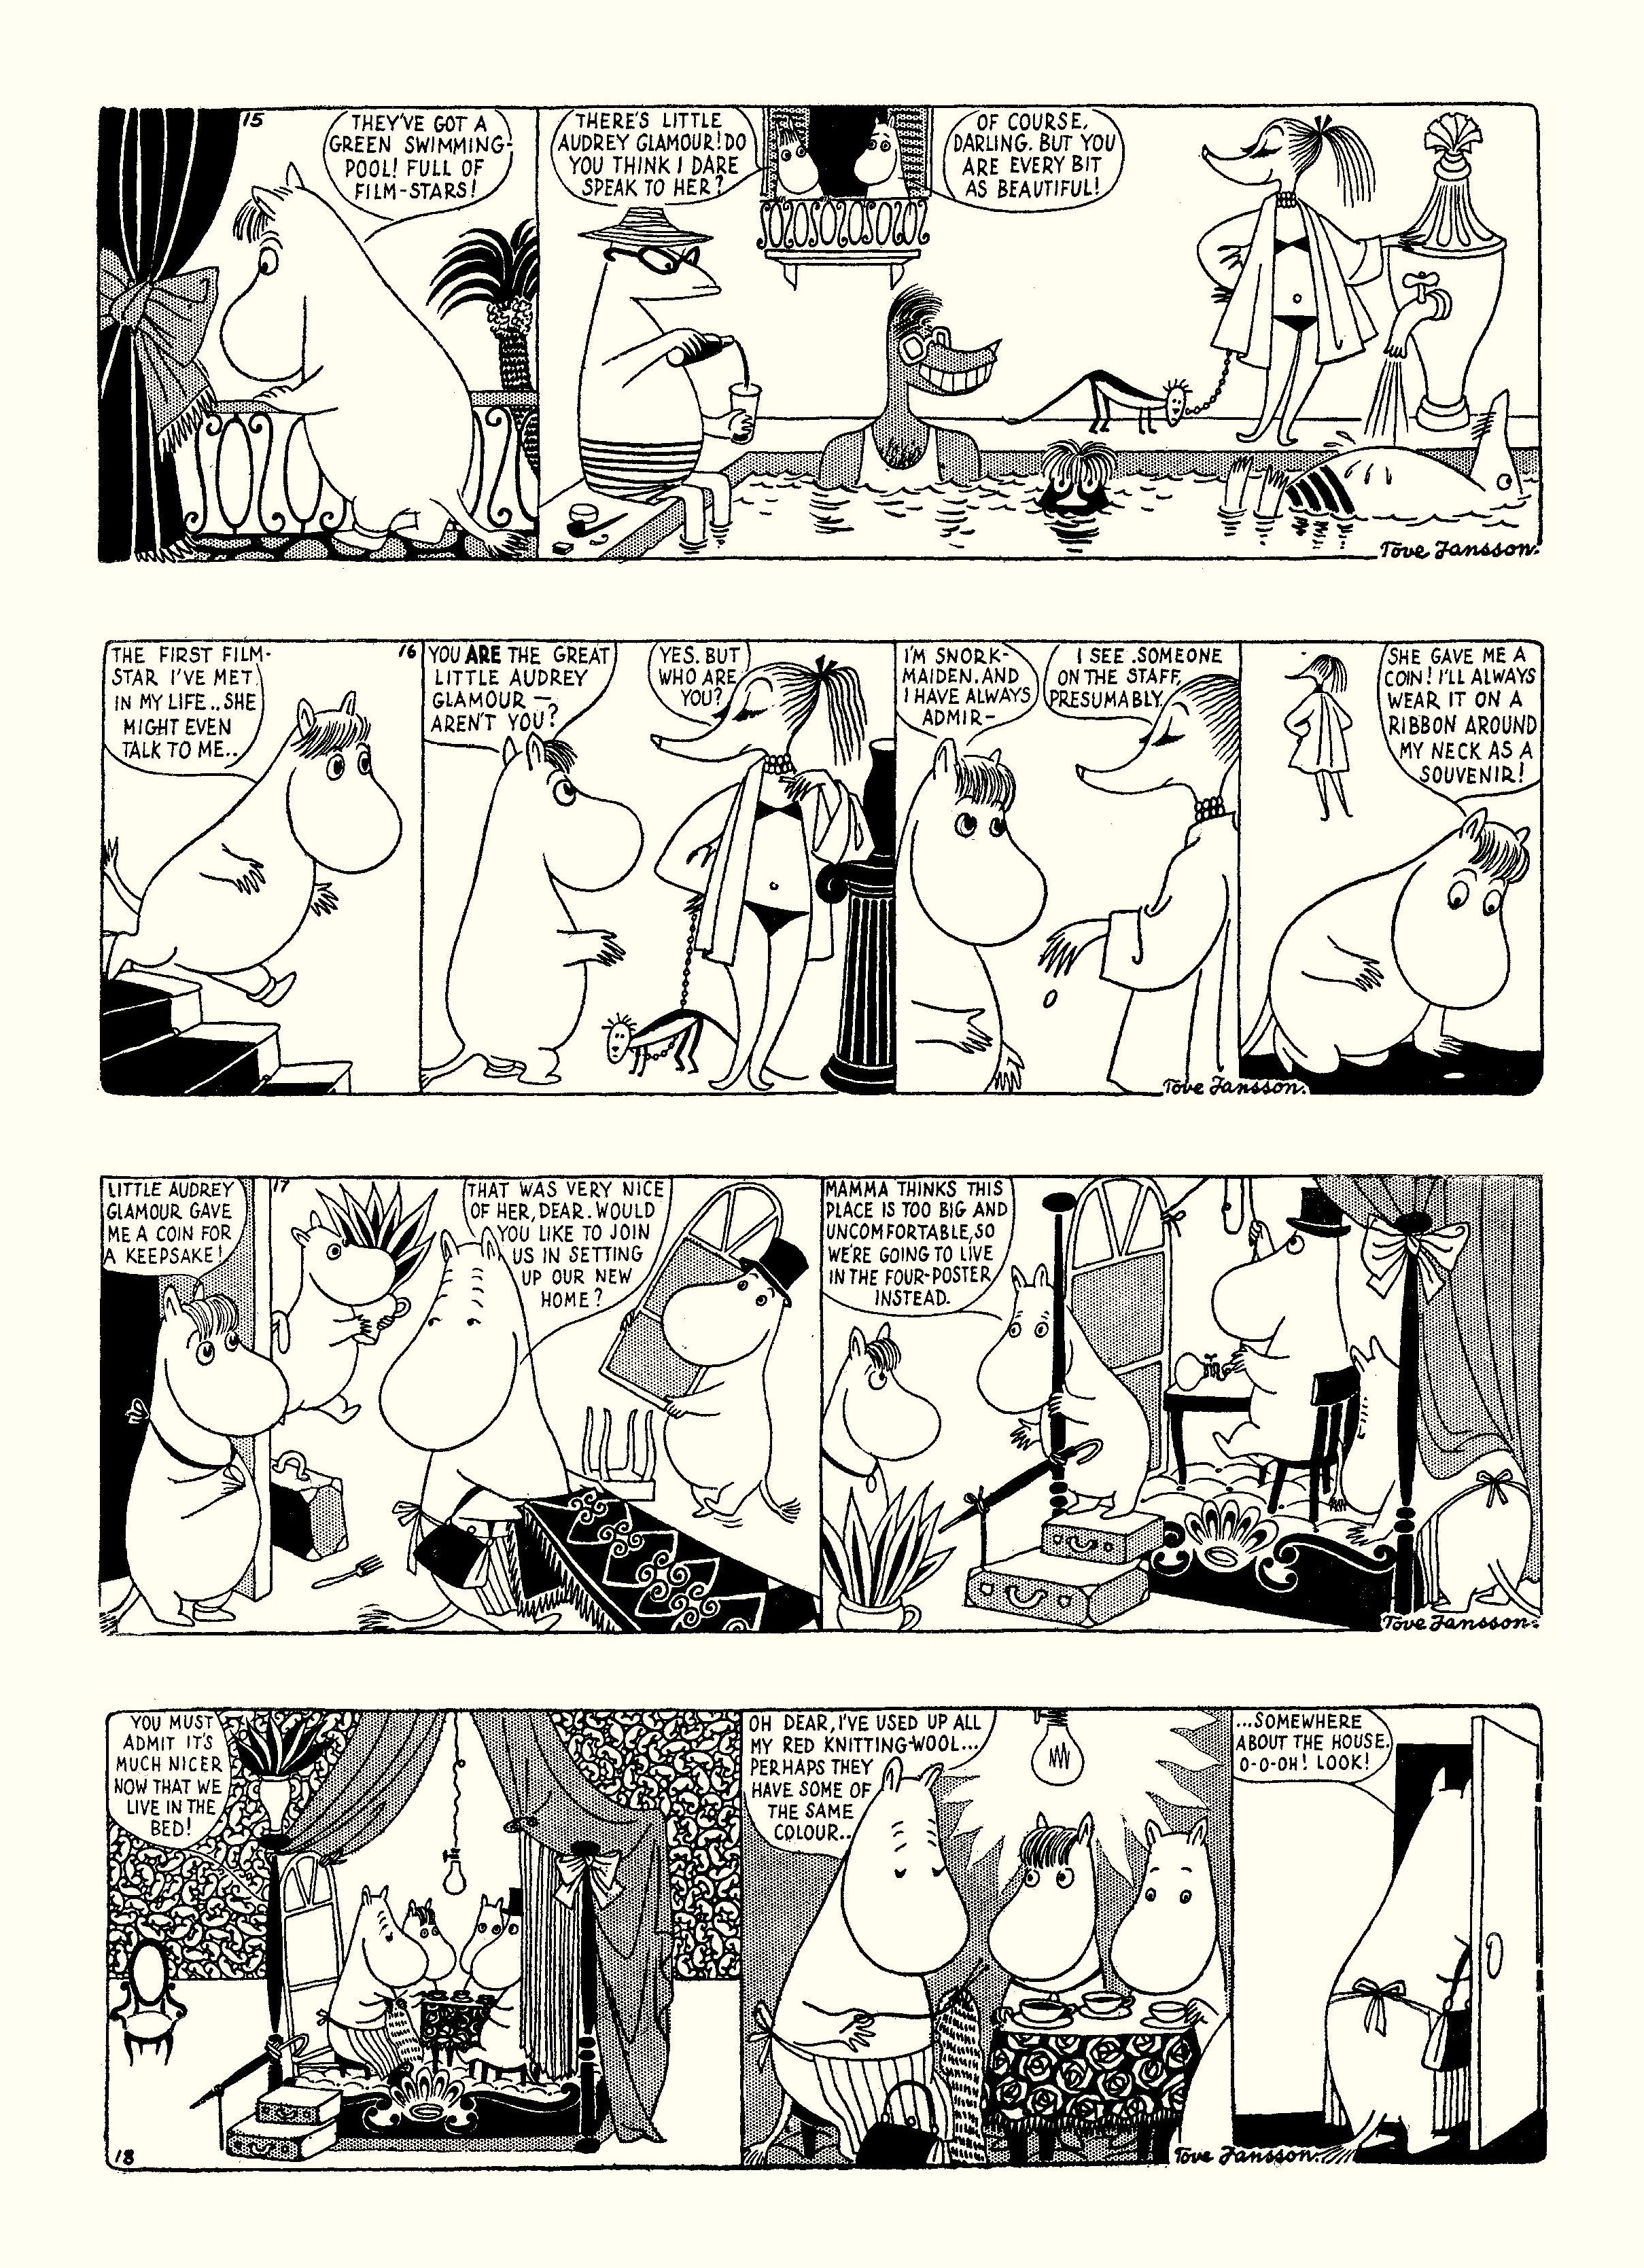 Read online Moomin: The Complete Tove Jansson Comic Strip comic -  Issue # TPB 1 - 52